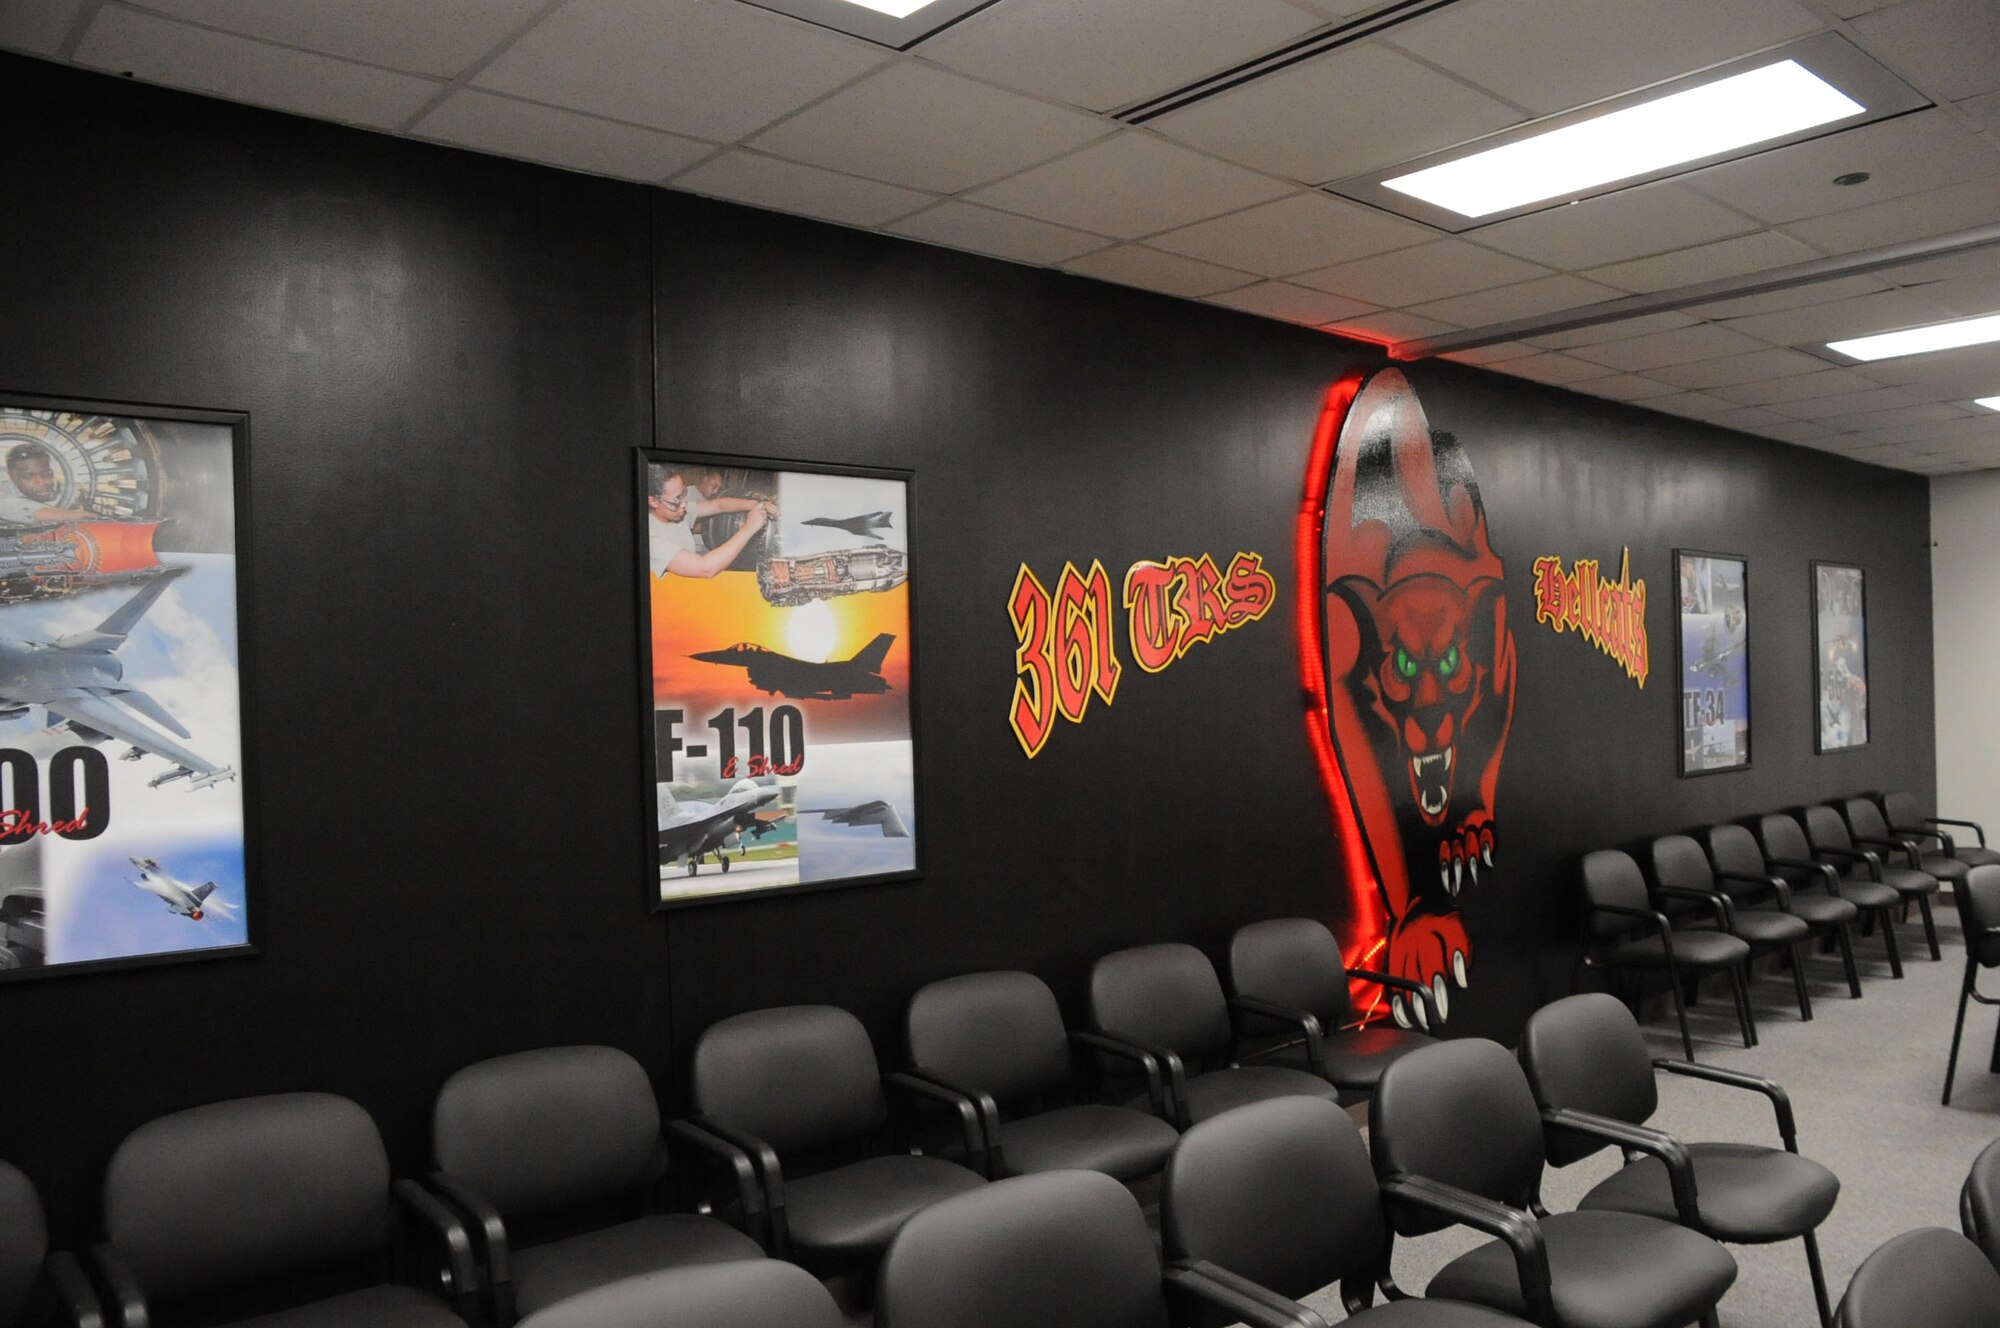 View of the squadron logo and Air Force Speciality Code (AFSC) wall in the redesigned 361st Training Squadron's aerospace propulsion "pride" room.  The aerospace propulsion flight's graduation room was given a facelift by the 82nd Training Wing public affairs team to help build pride and foster the wing's mission to "Train and Inspire Airmen". (U.S. Air Force photo/Dan Hawkins